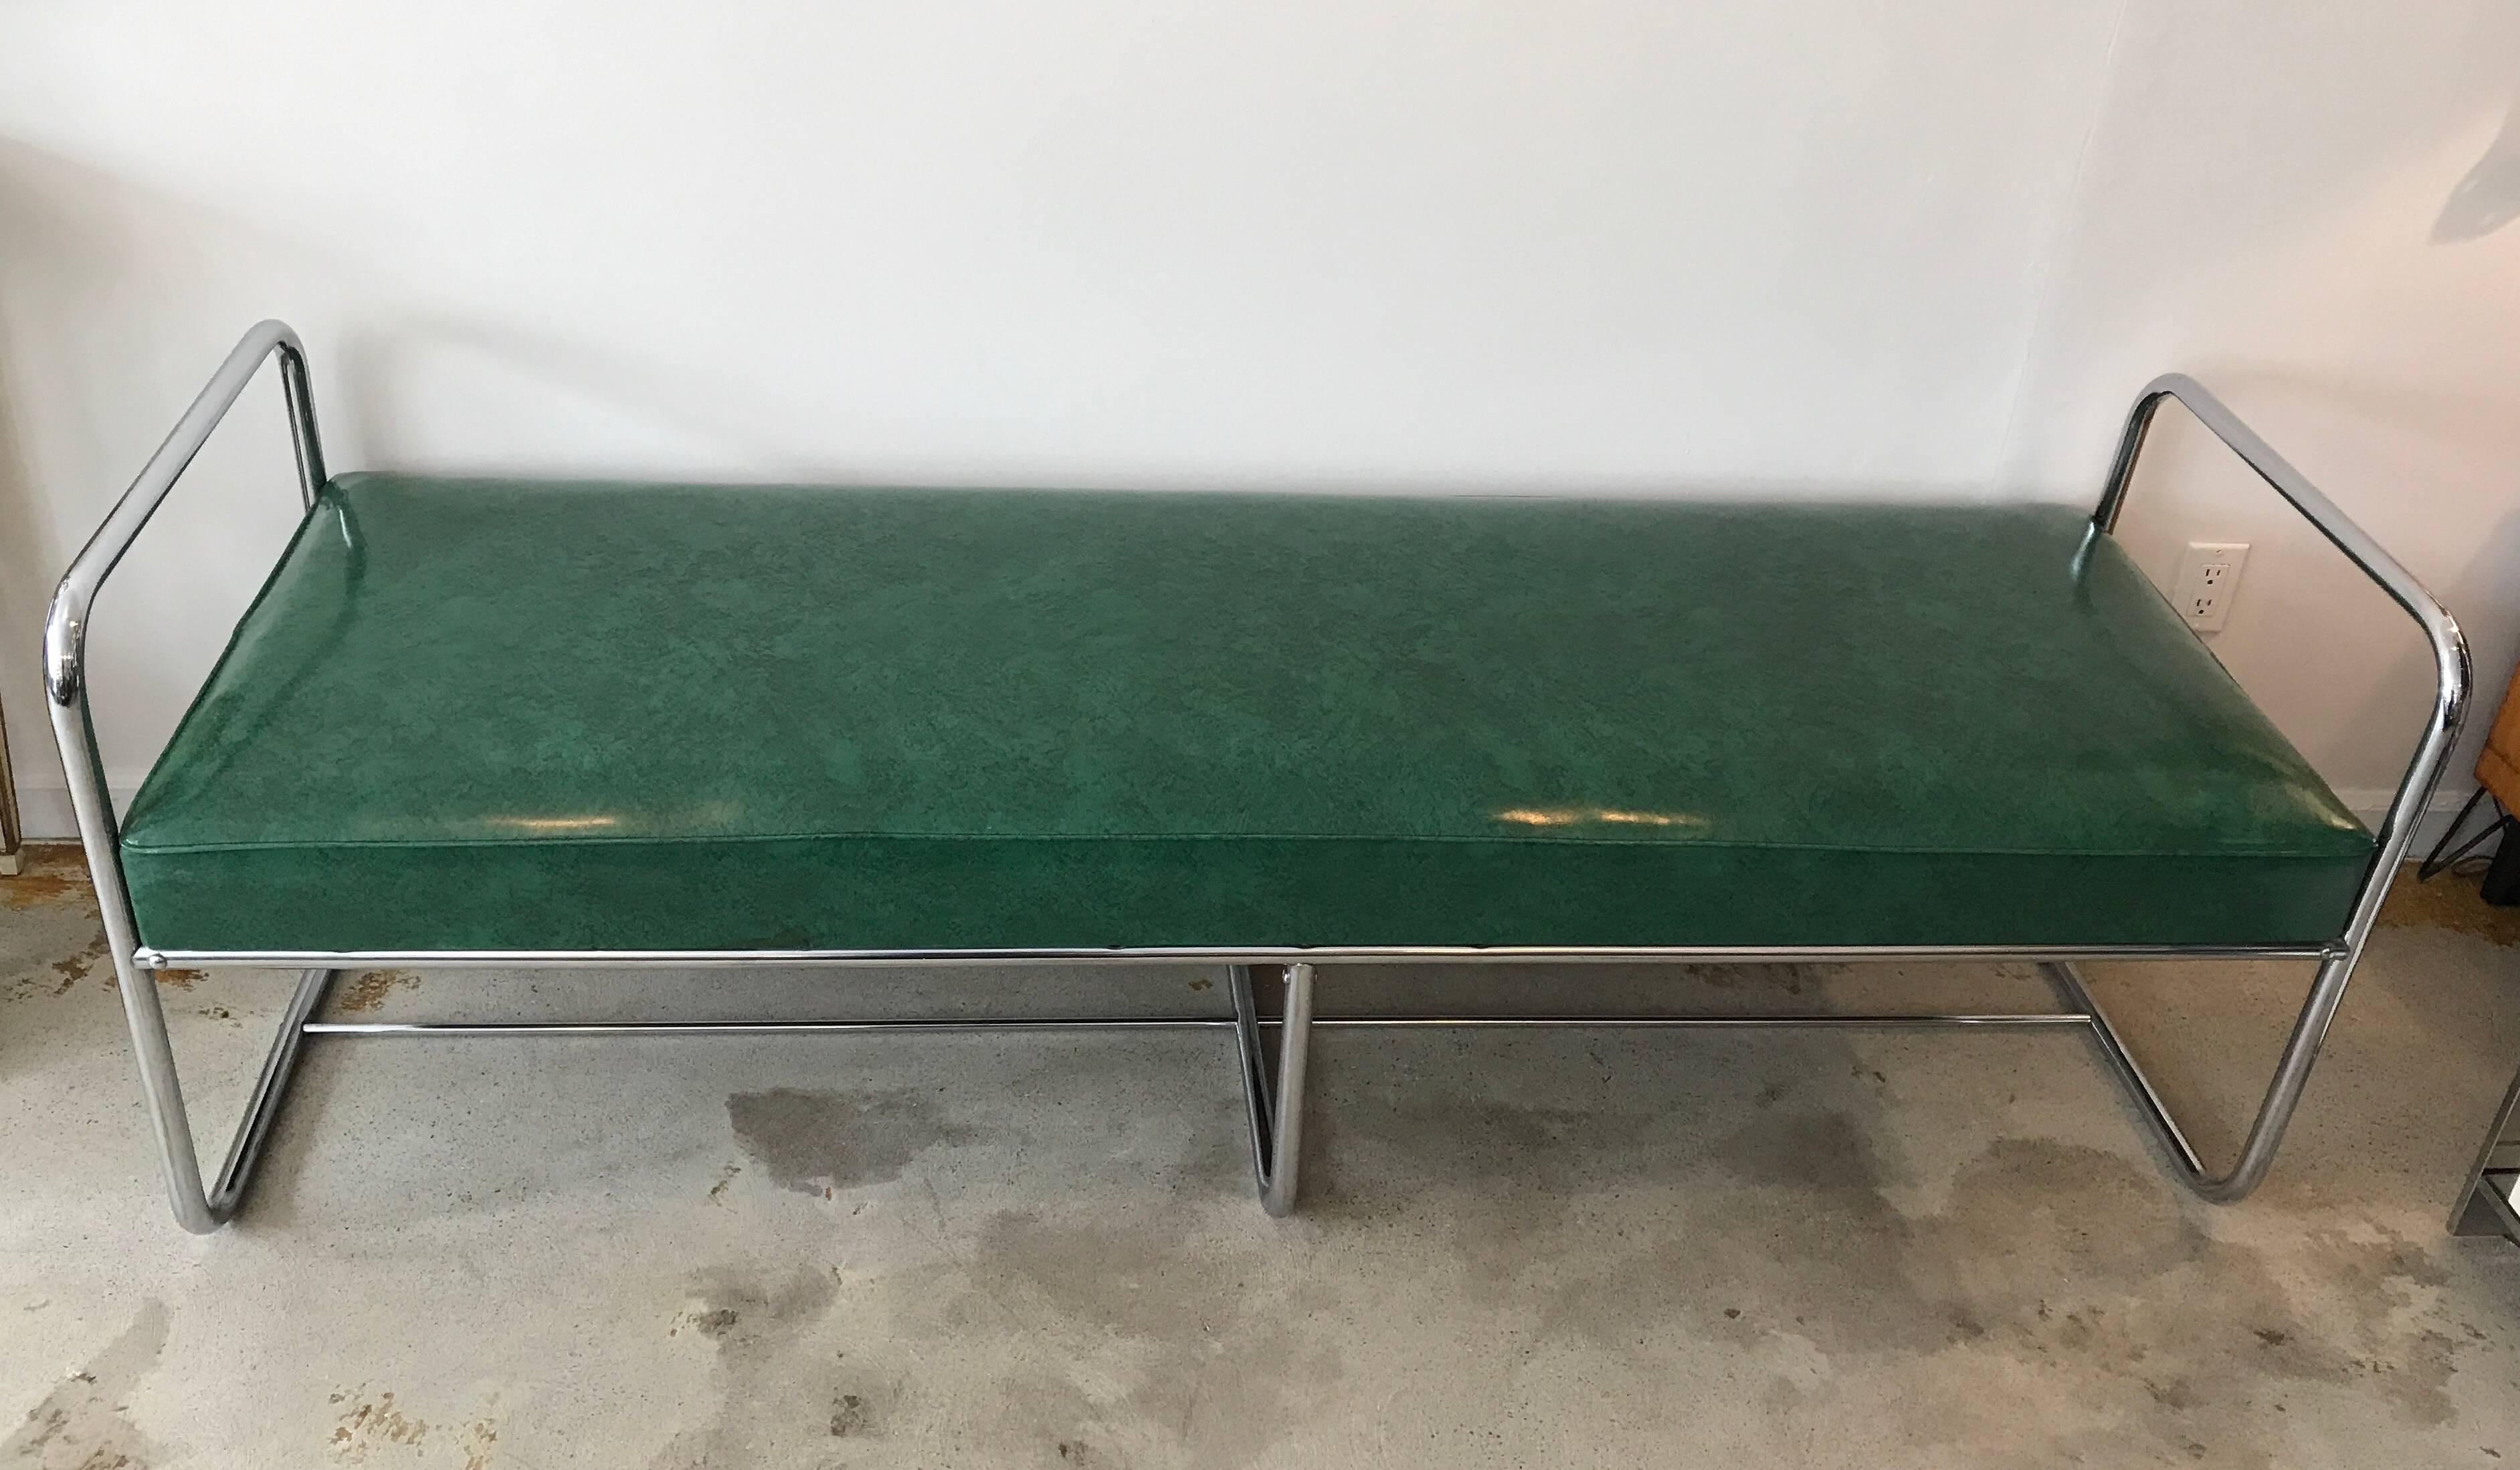 Awesome streamline moderne industrial bench with chromed metal tubular frame. All original green vinyl seating in great condition. This piece is consistent to the designs of KEM Weber, circa 1930s.